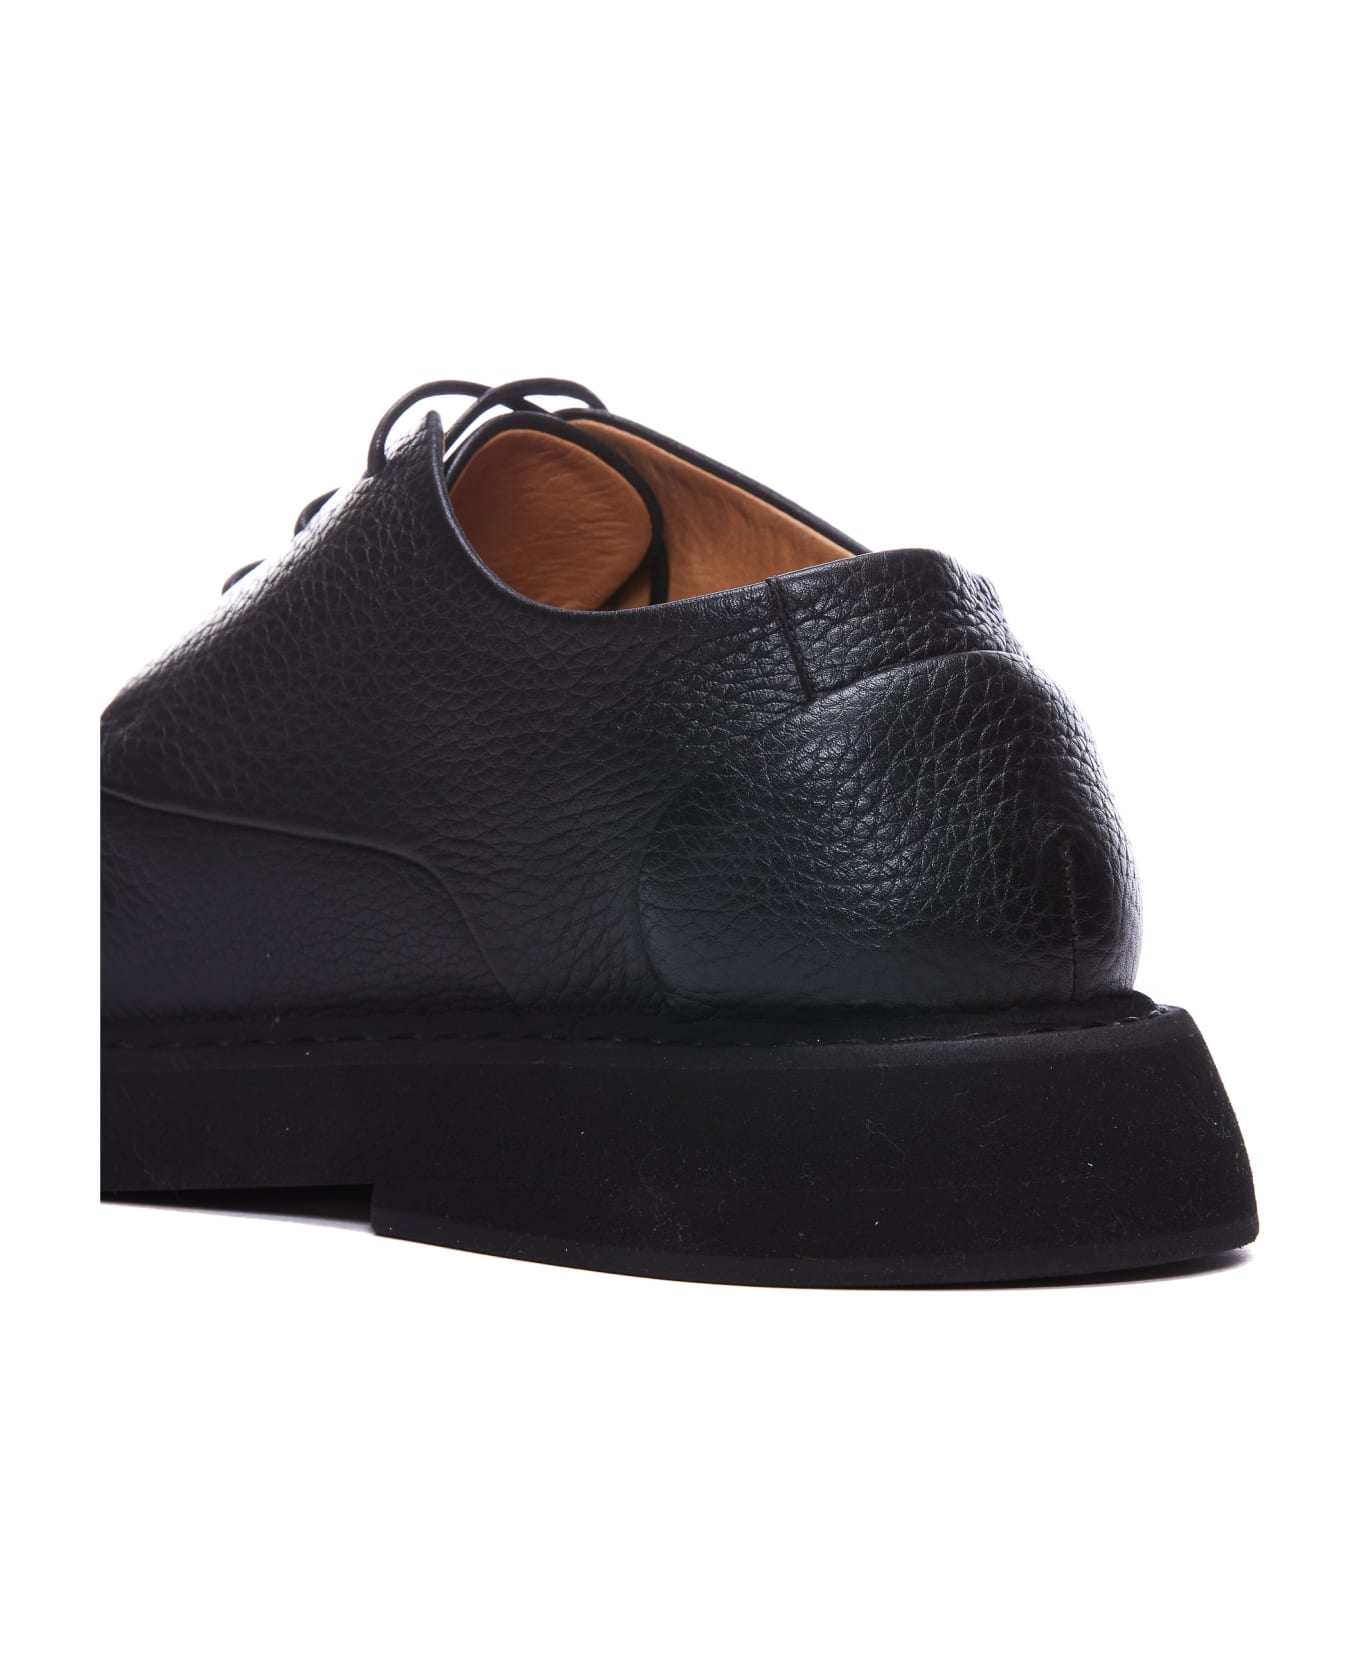 Marsell Spalla Laced Up Shoes - Black